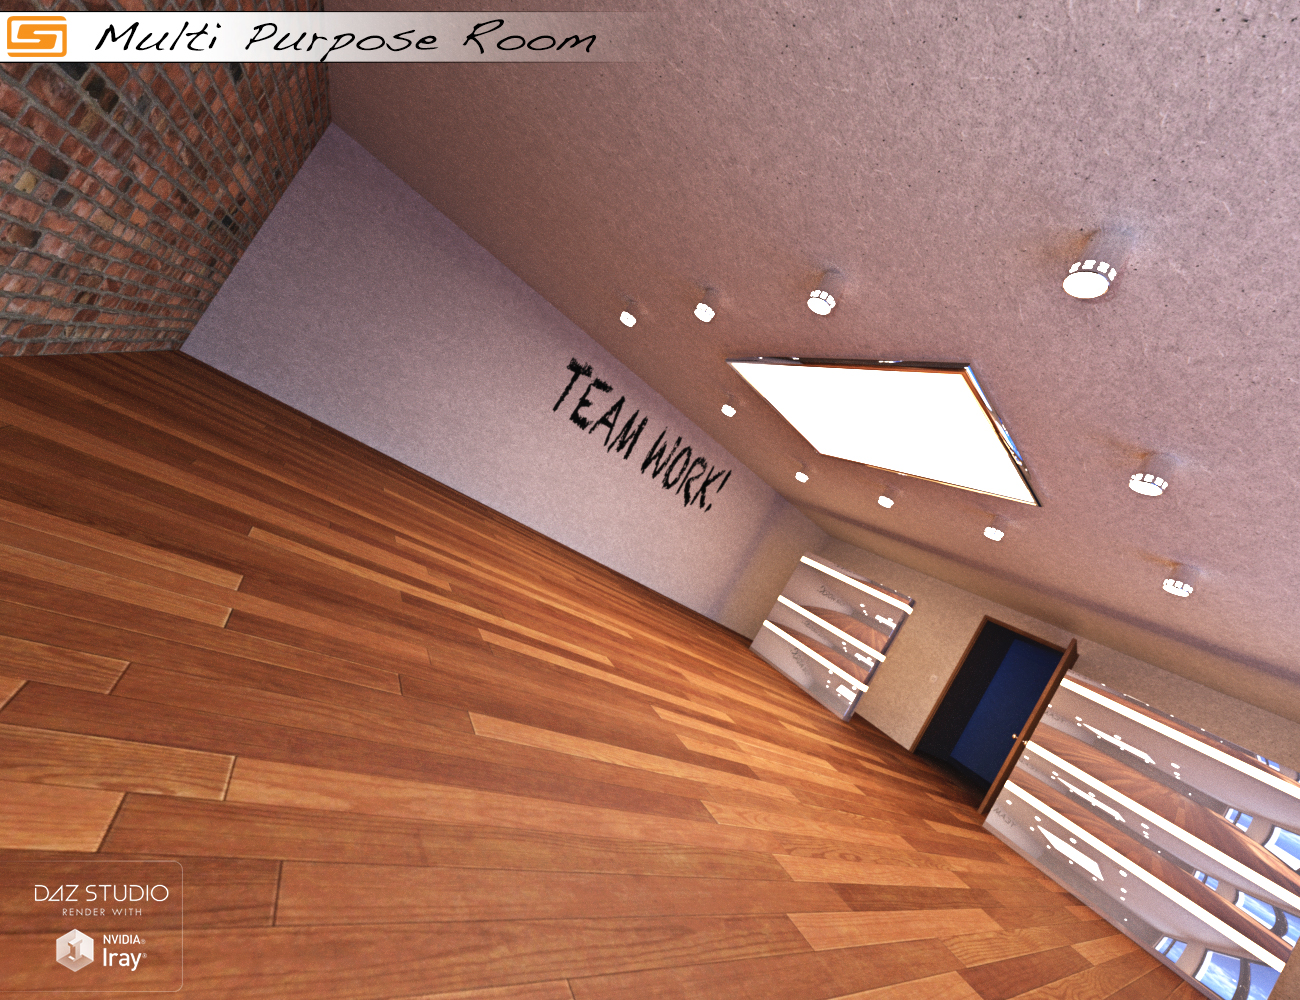 Multi Purpose Room (Meeting / Briefing / Class / Office  Room) by: Sedor, 3D Models by Daz 3D